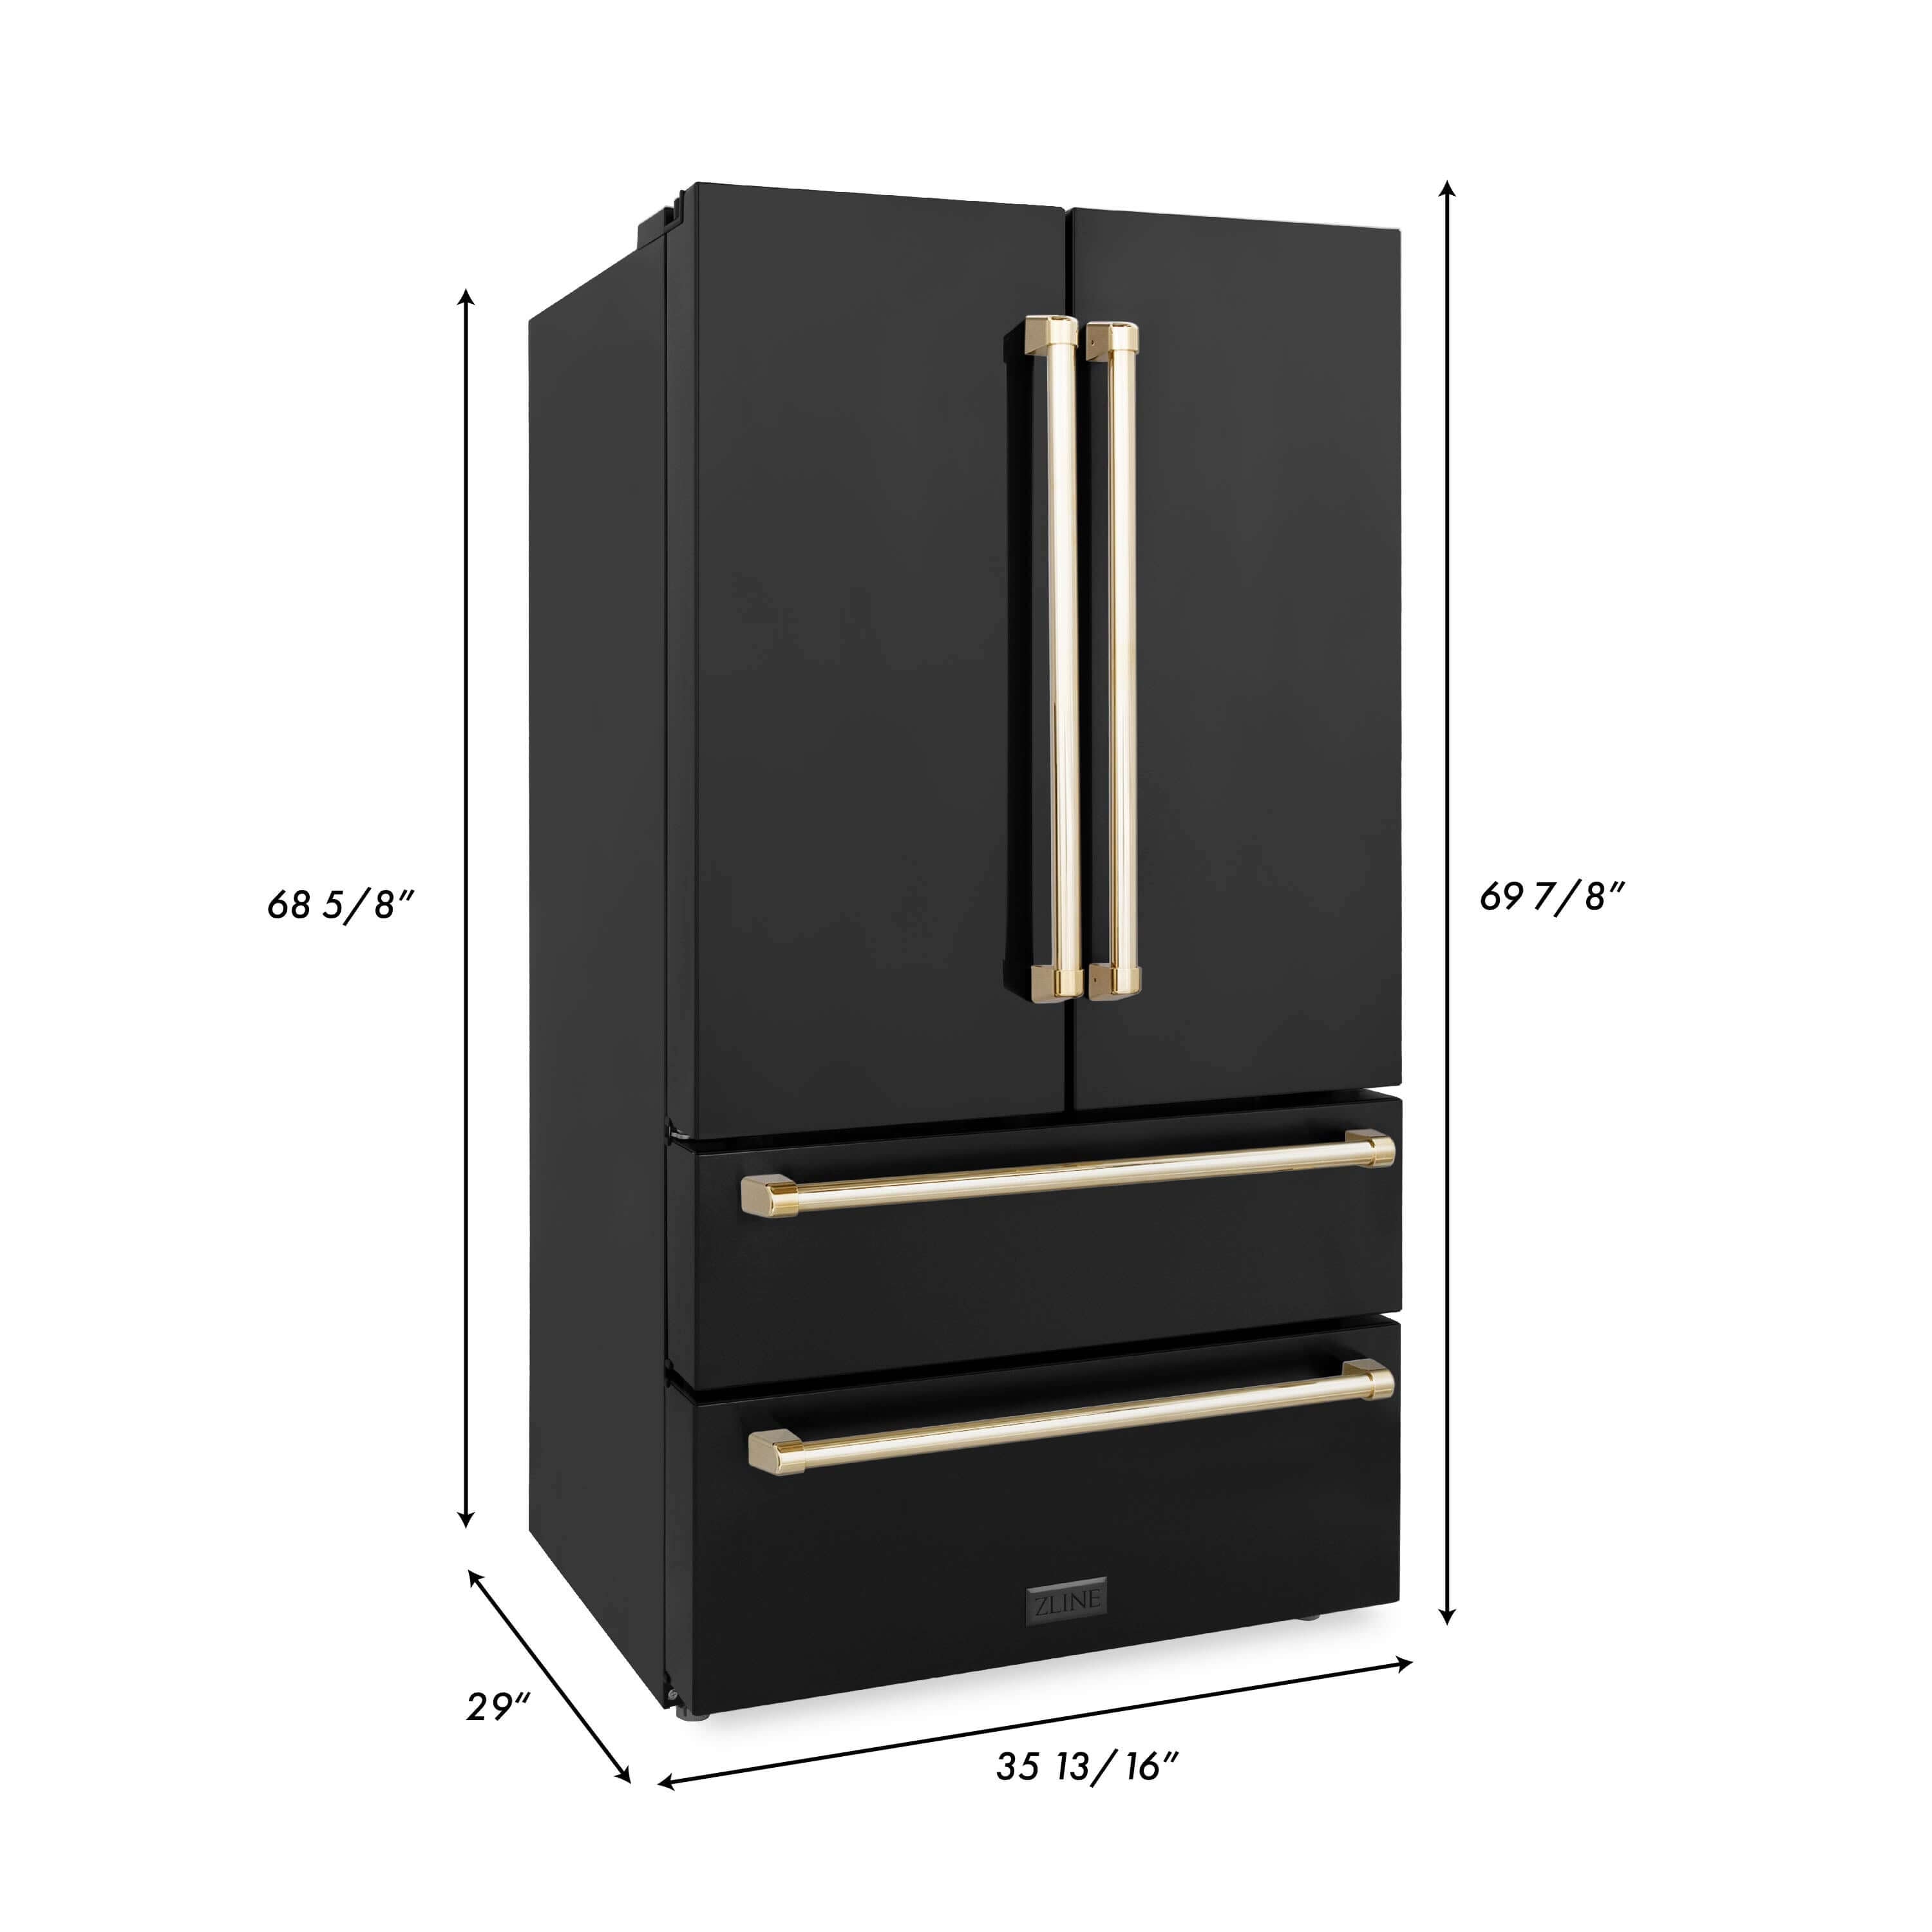 ZLINE Autograph Edition 36 in. Kitchen Package with Black Stainless Steel Dual Fuel Range, Range Hood, Dishwasher, and French Door Refrigerator with Polished Gold Accents (4AKPR-RABRHDWV36-G) dimensional diagram with measurements.